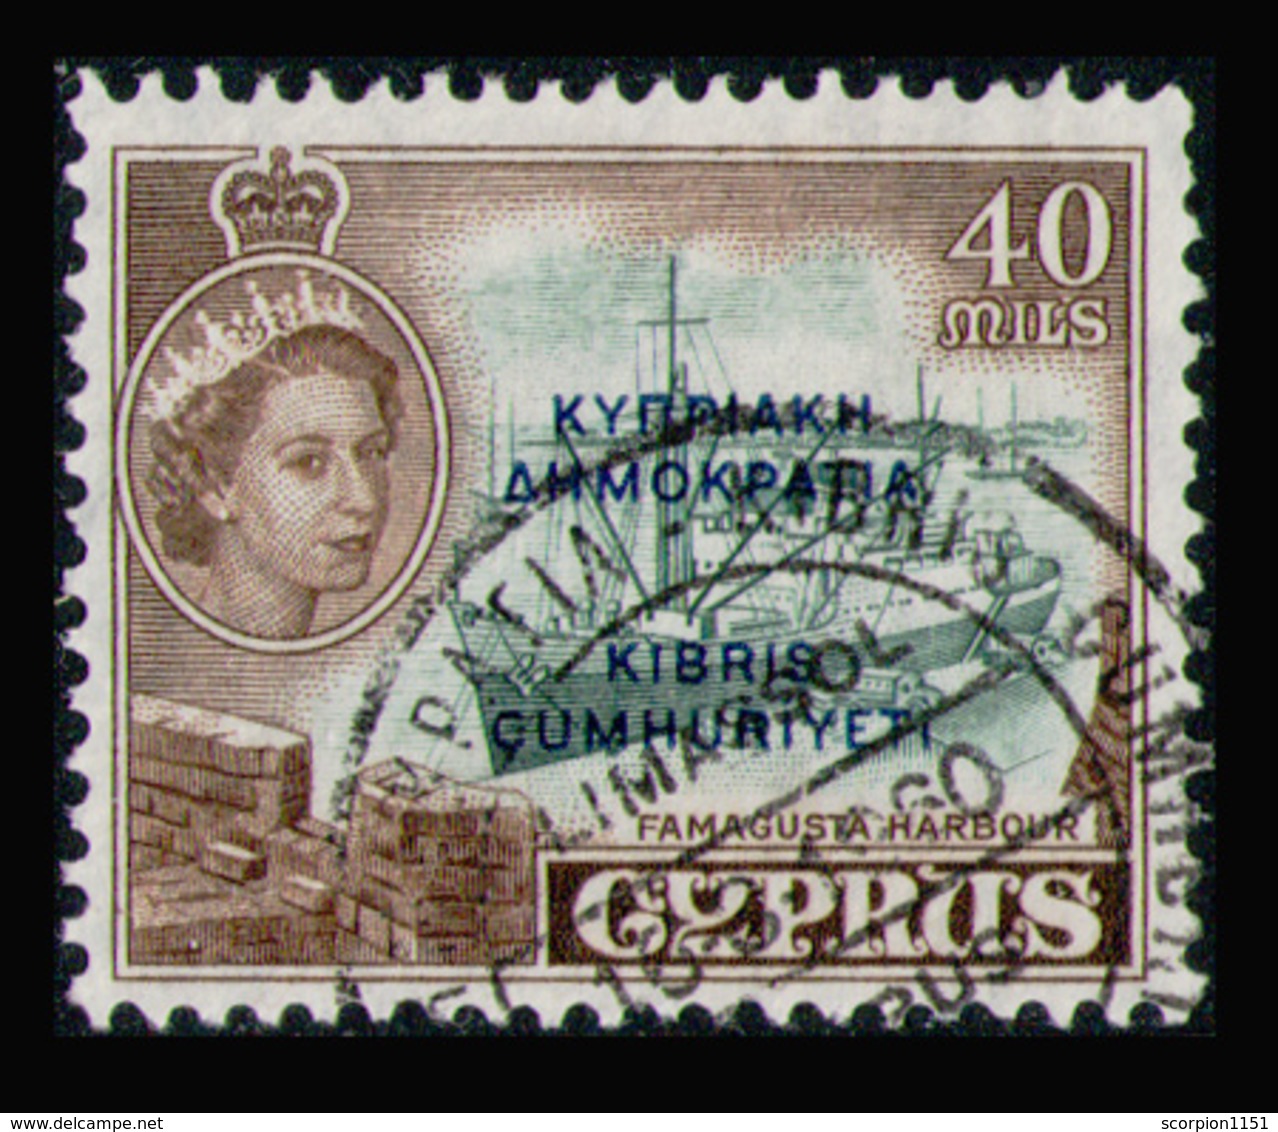 CYPRUS 1960 - From Set Used - Used Stamps